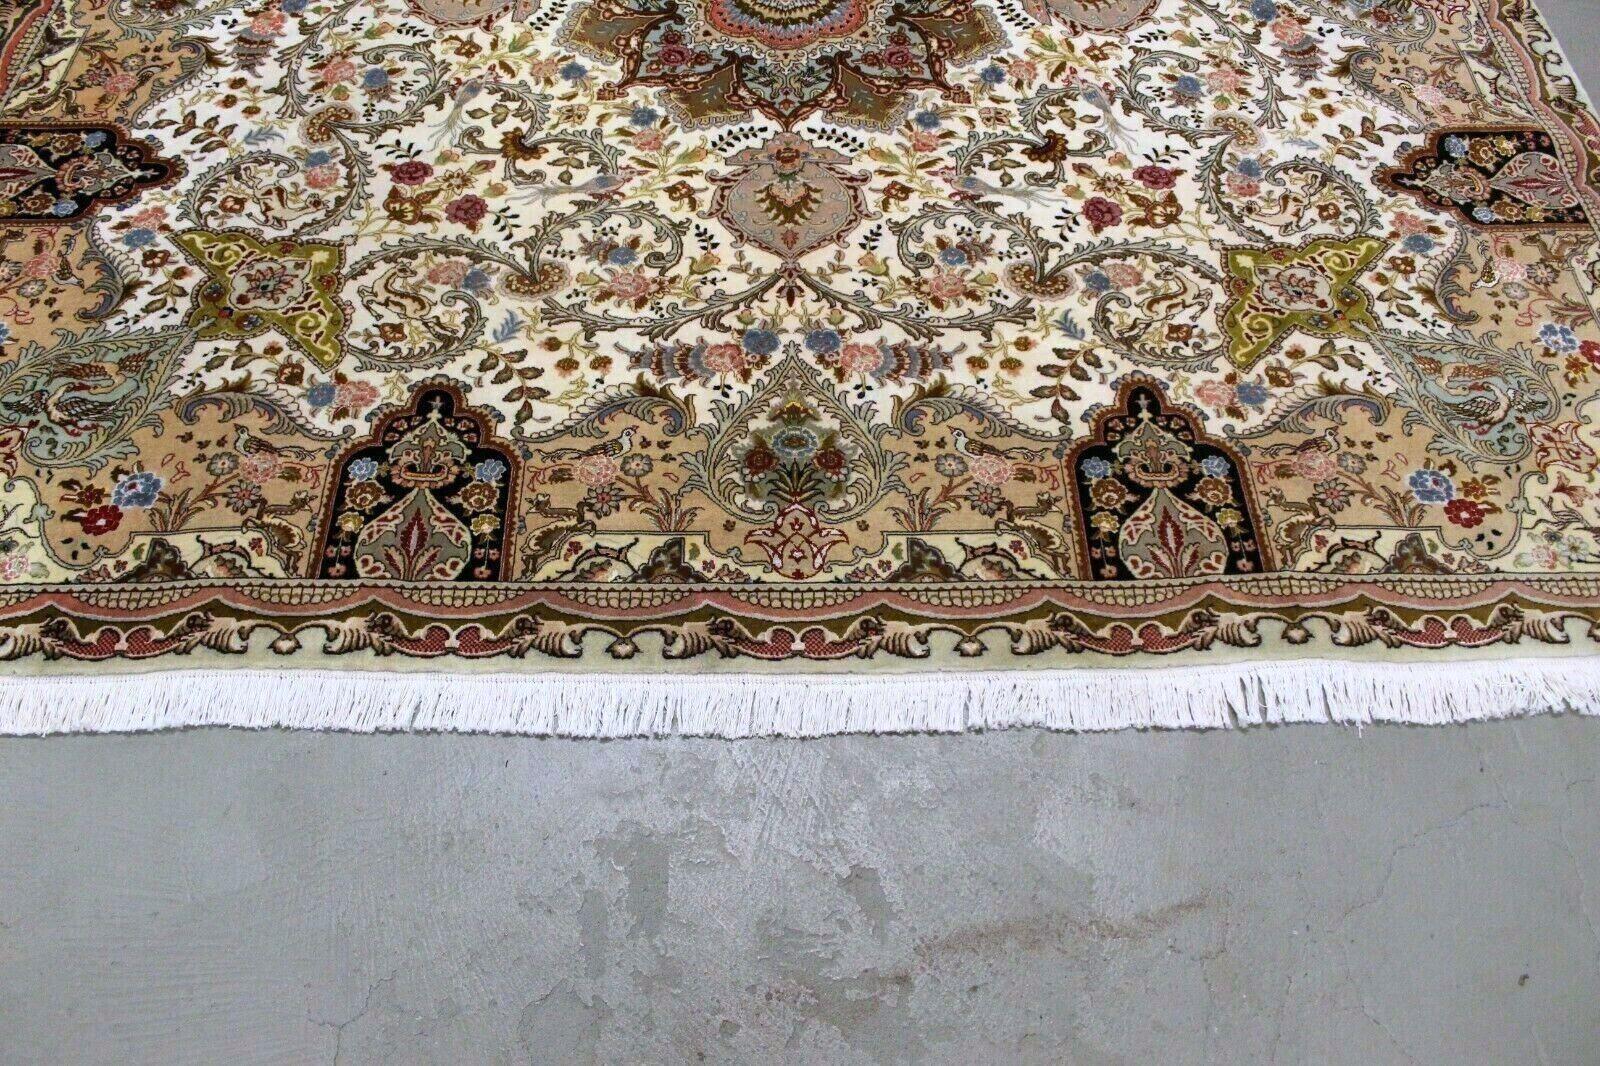 Handmade Vintage Persian Style Tabriz Rug With Silk 8.2' x 8.2', 1970s - 1K48 For Sale 2